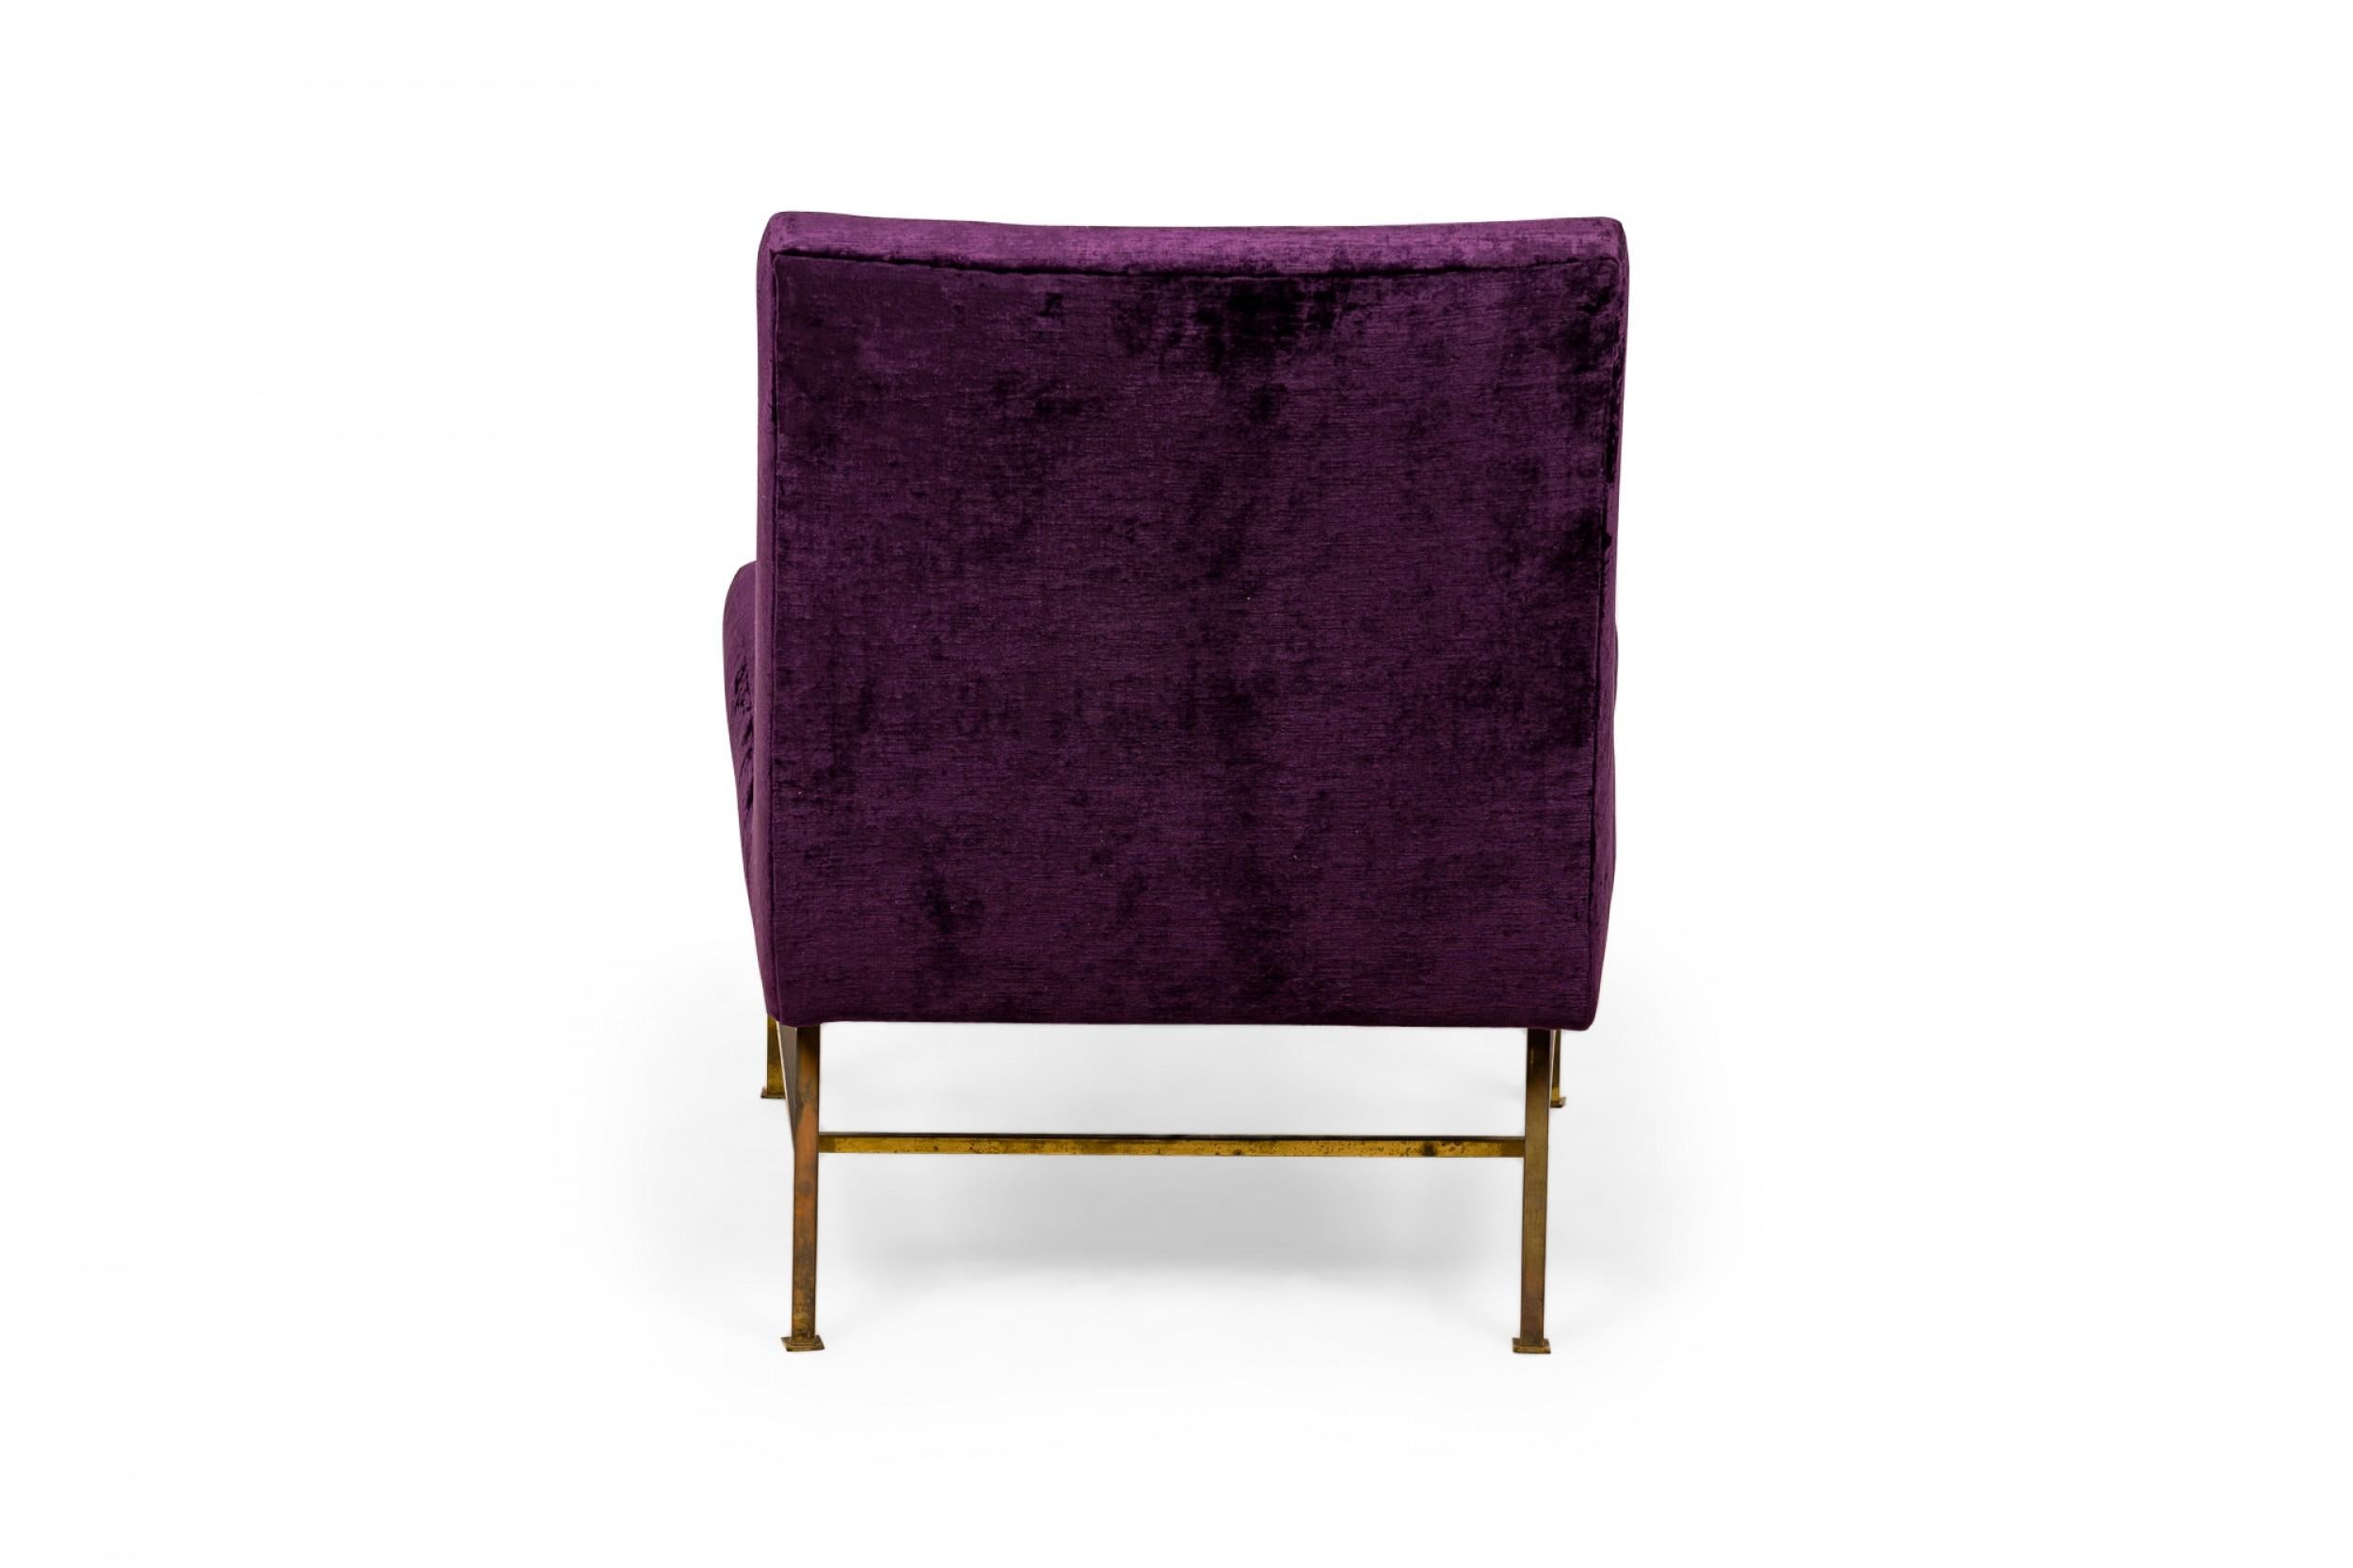 20th Century Harvey Probber American Mid-Century Purple Velour and Brass Slipper Chair For Sale